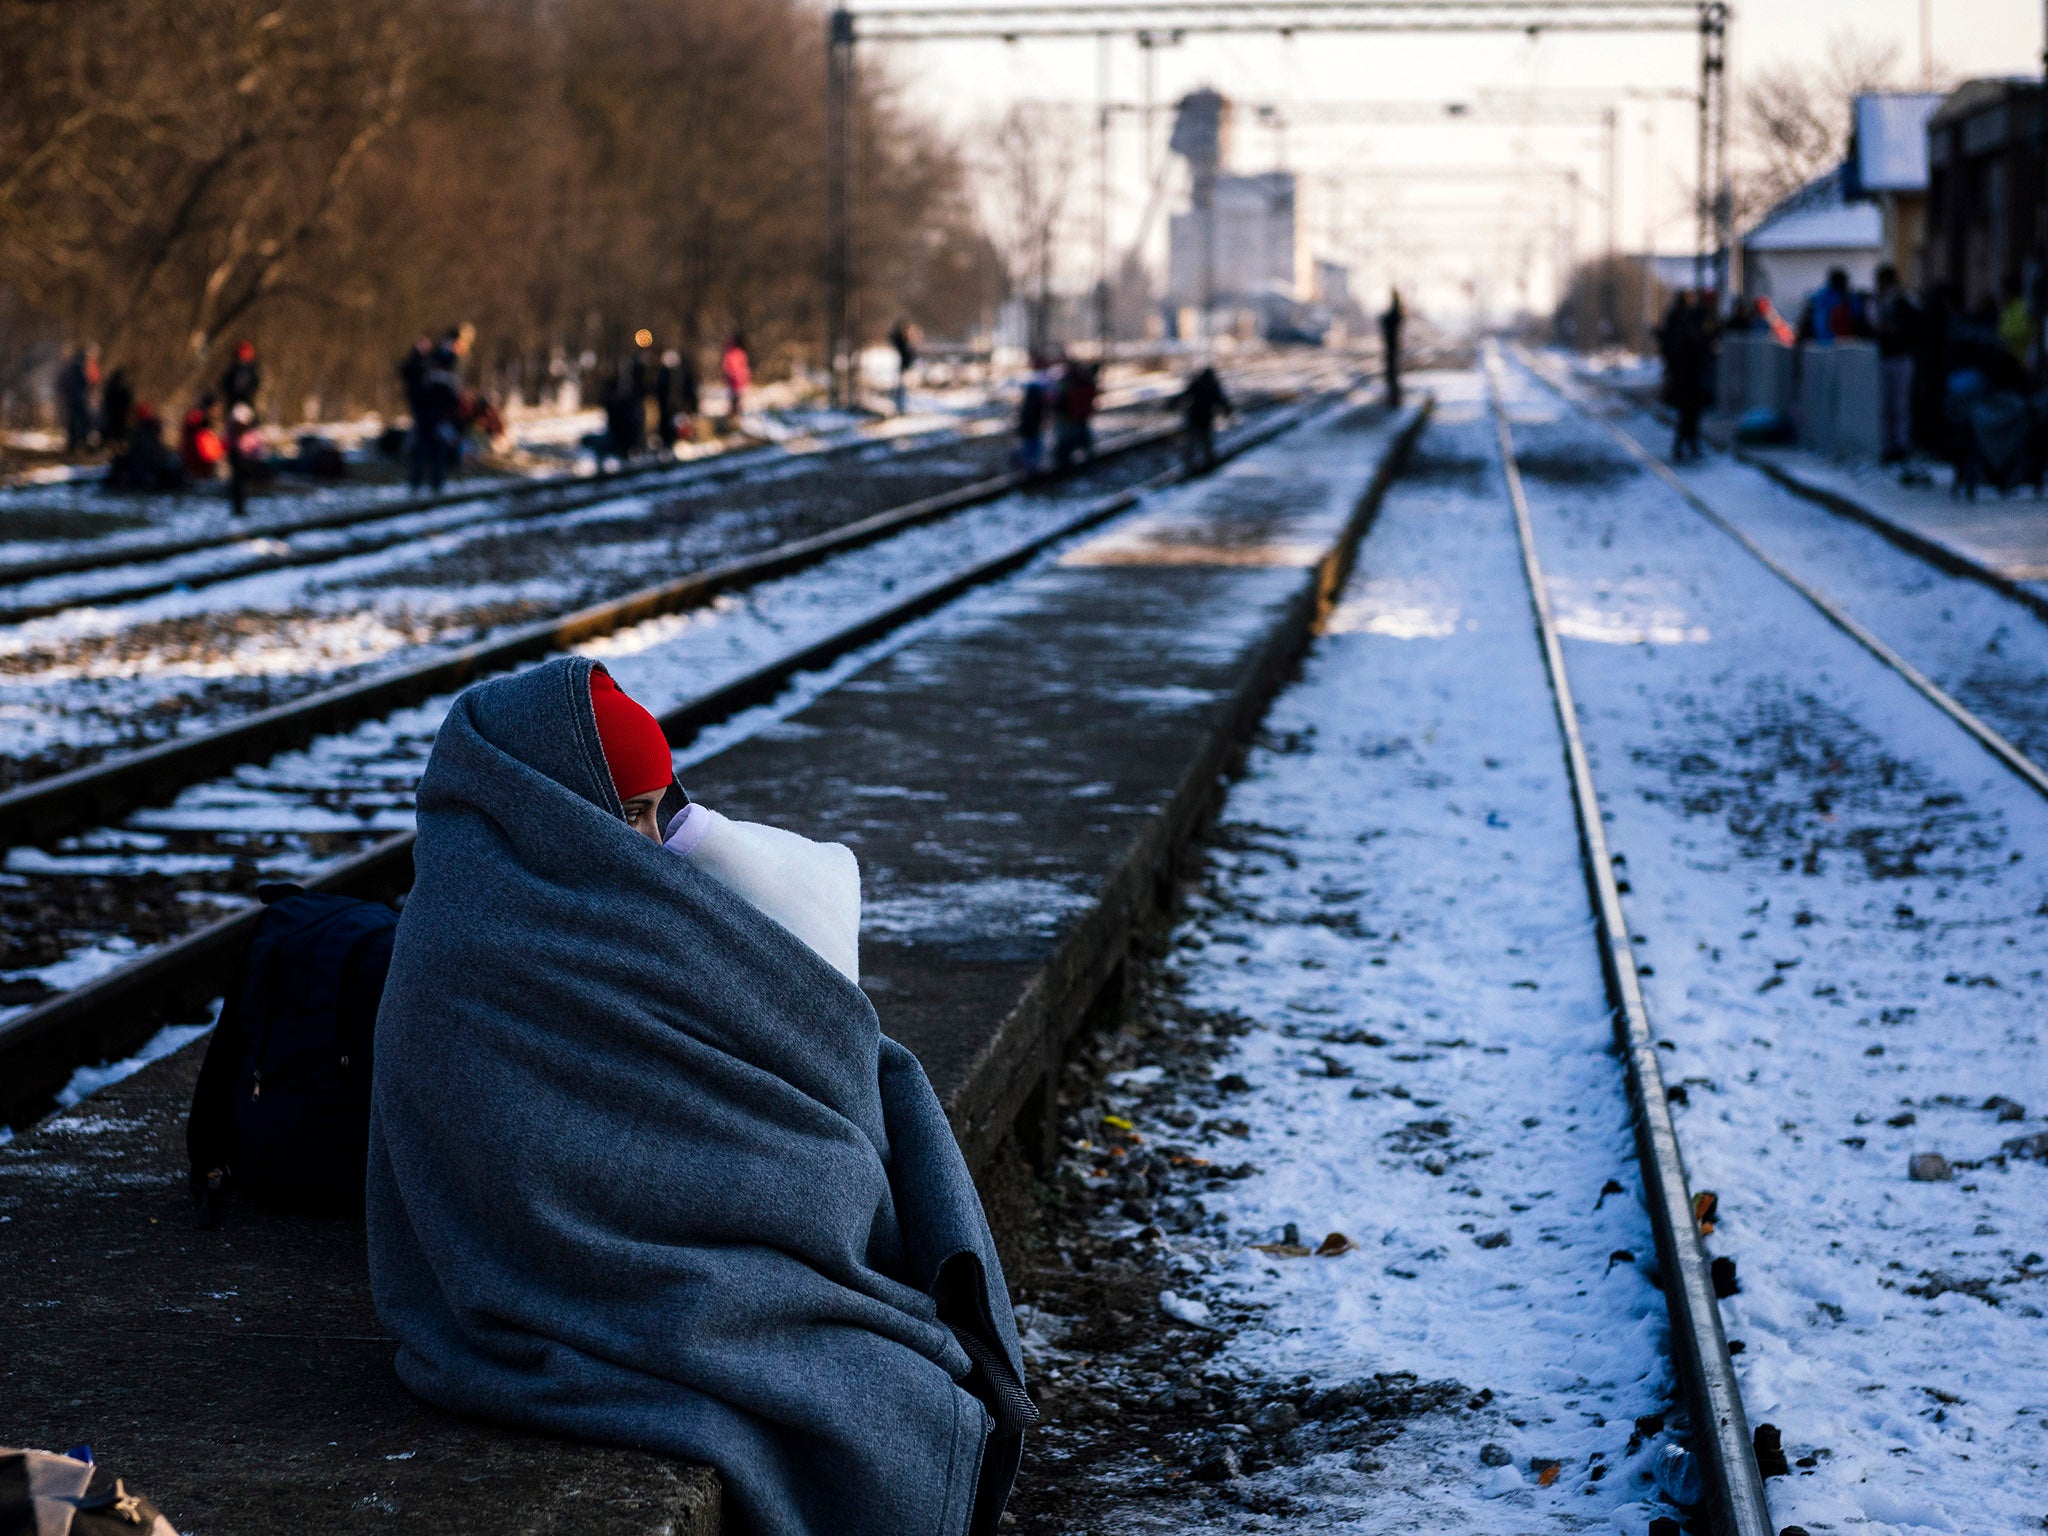 Refugees are continuing to try to get to EU member countries - despite the winter cold